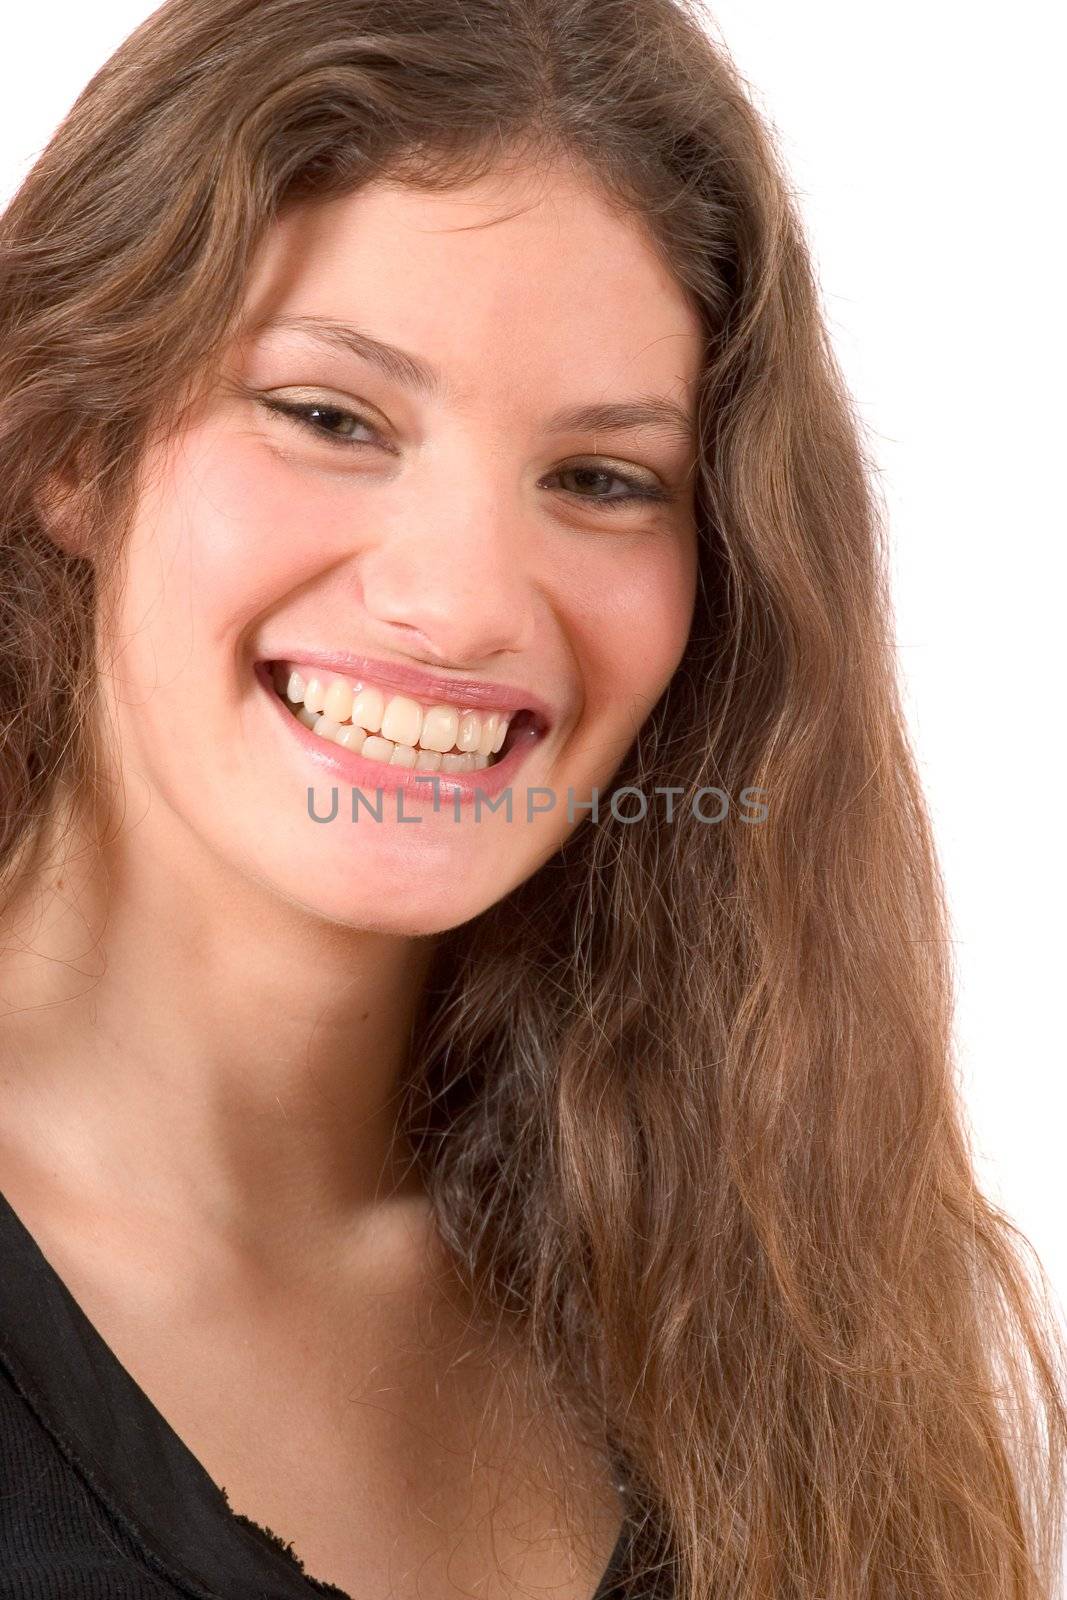 Beautiful young woman with a gorgeous smile